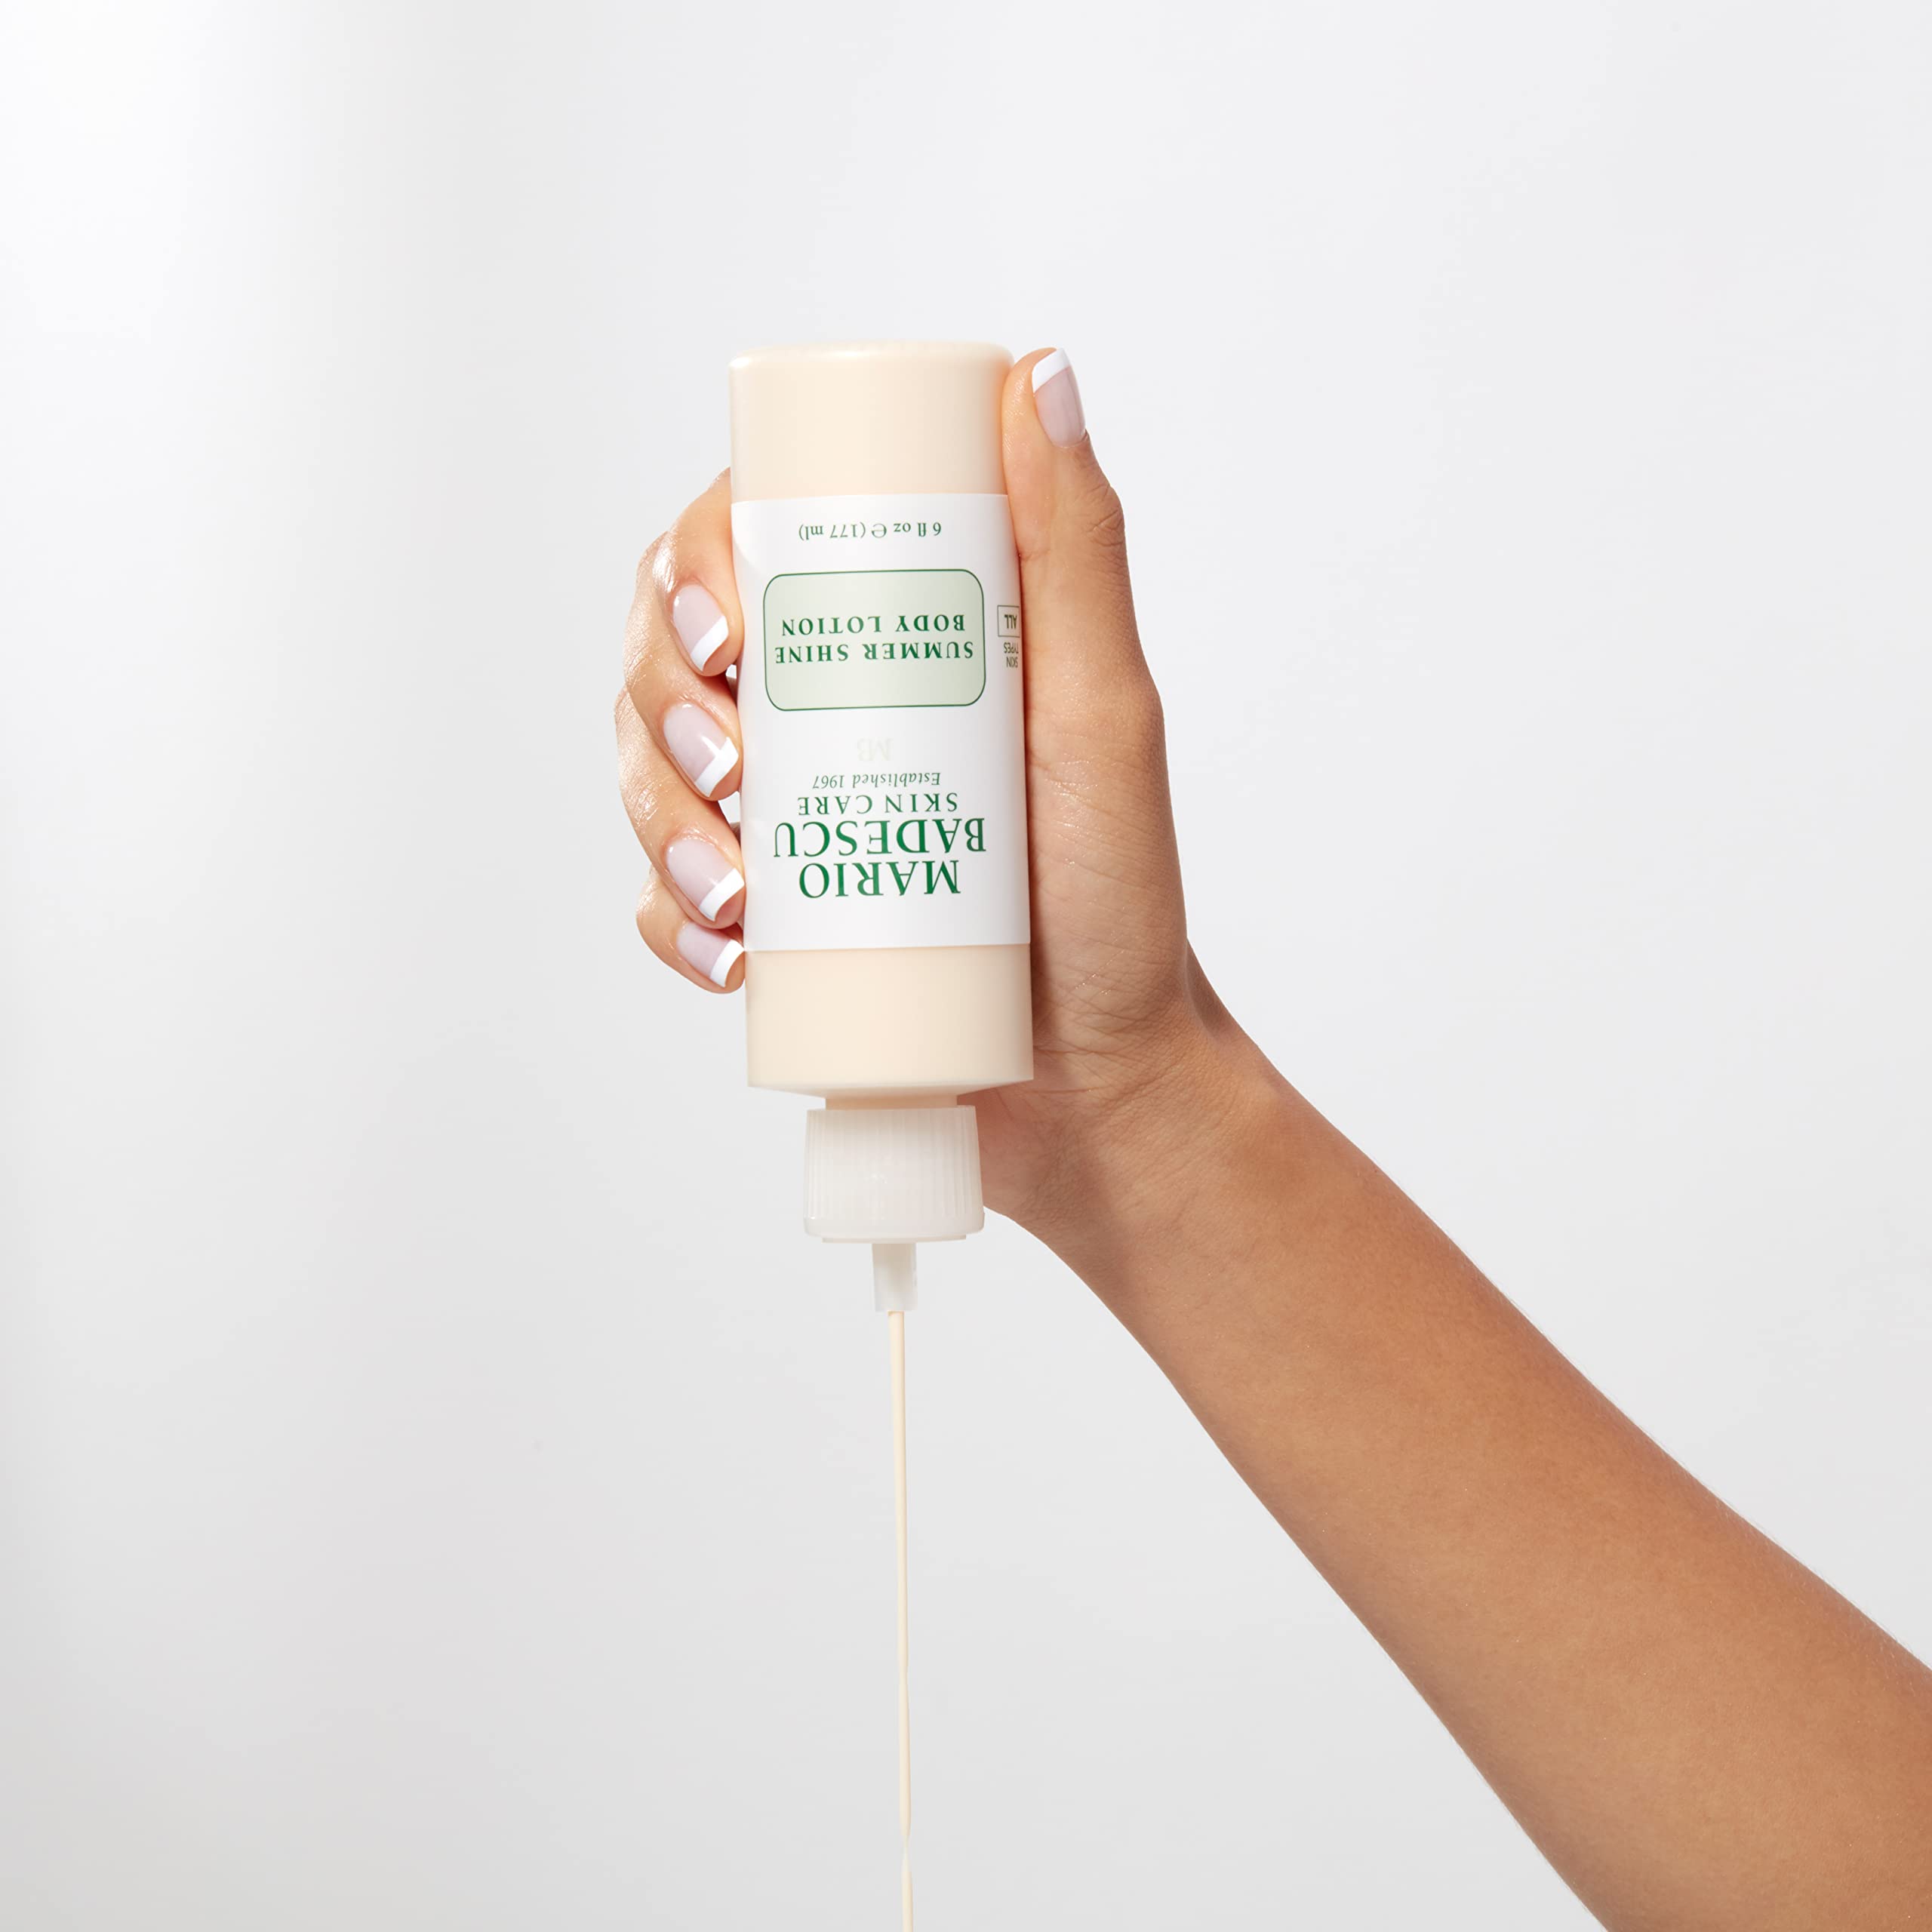 Mario Badescu Summer Shine Body Lotion Enriched with Vitamin A, Lightweight and Radiant, Non-Greasy Candlelit Glow Body Shimmer, Ideal for All Skin Types